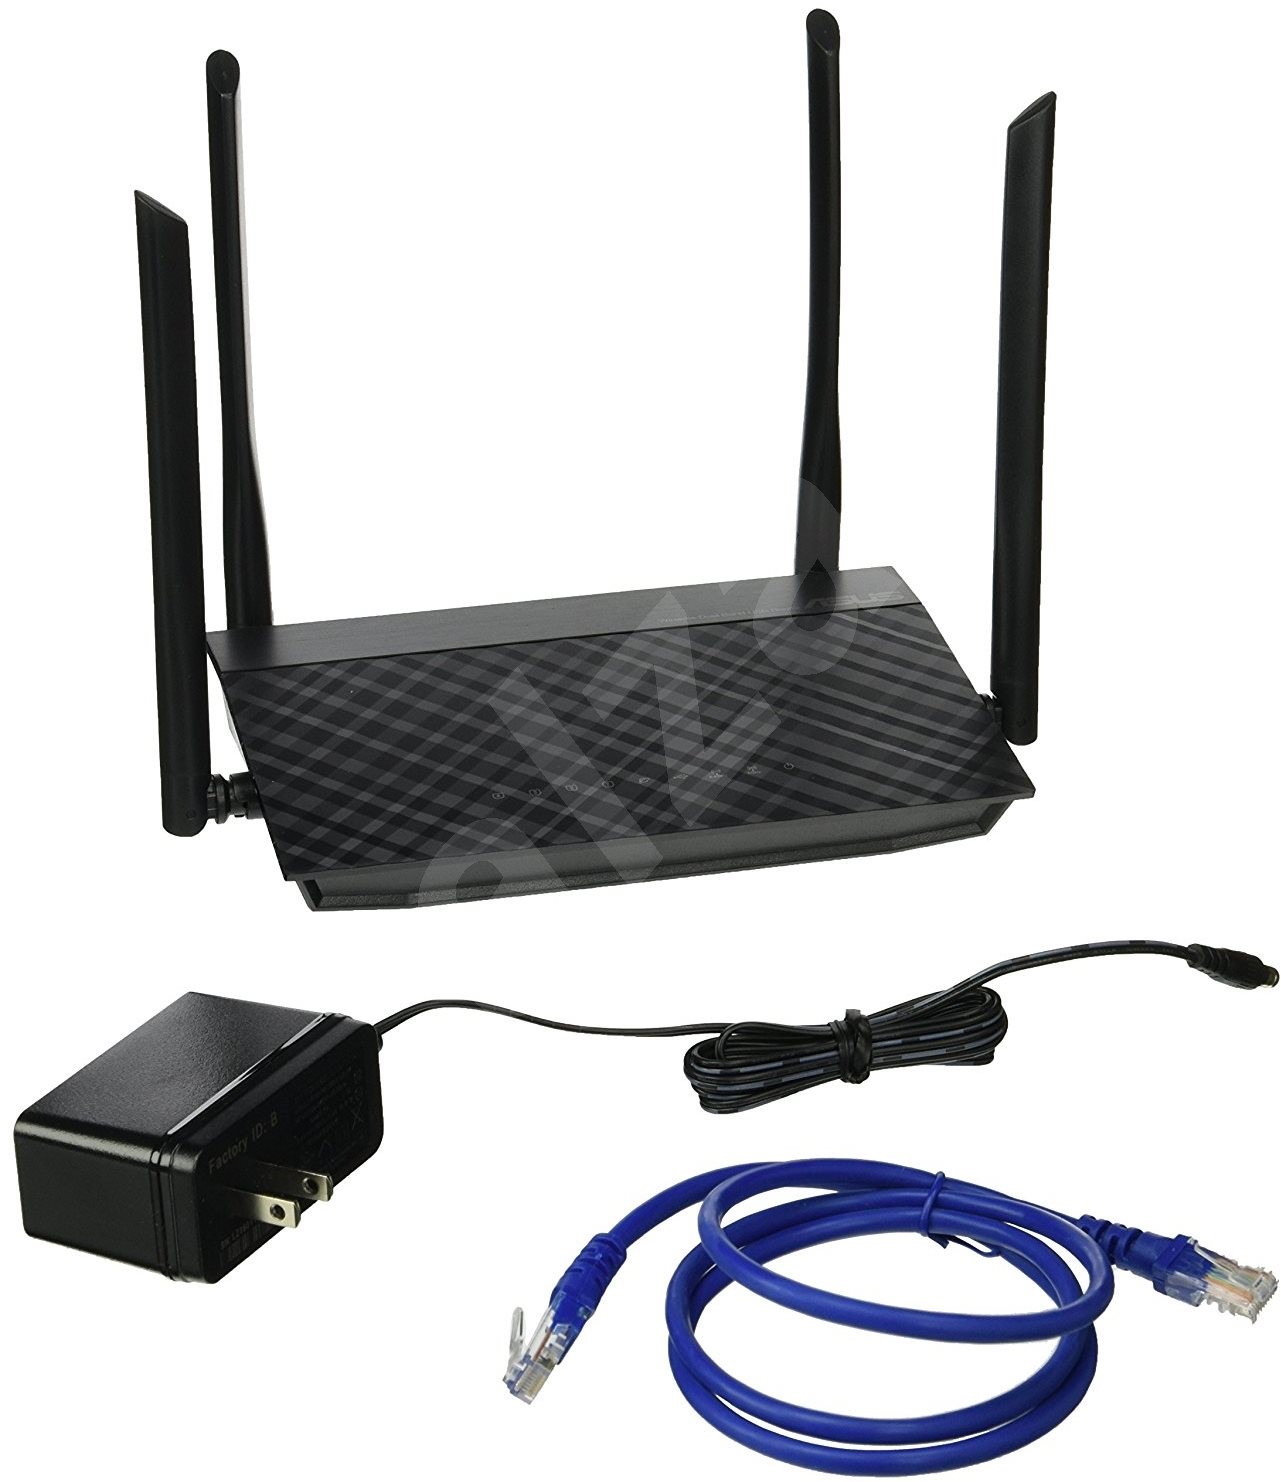 wifi tether router 6.0.1 note 4